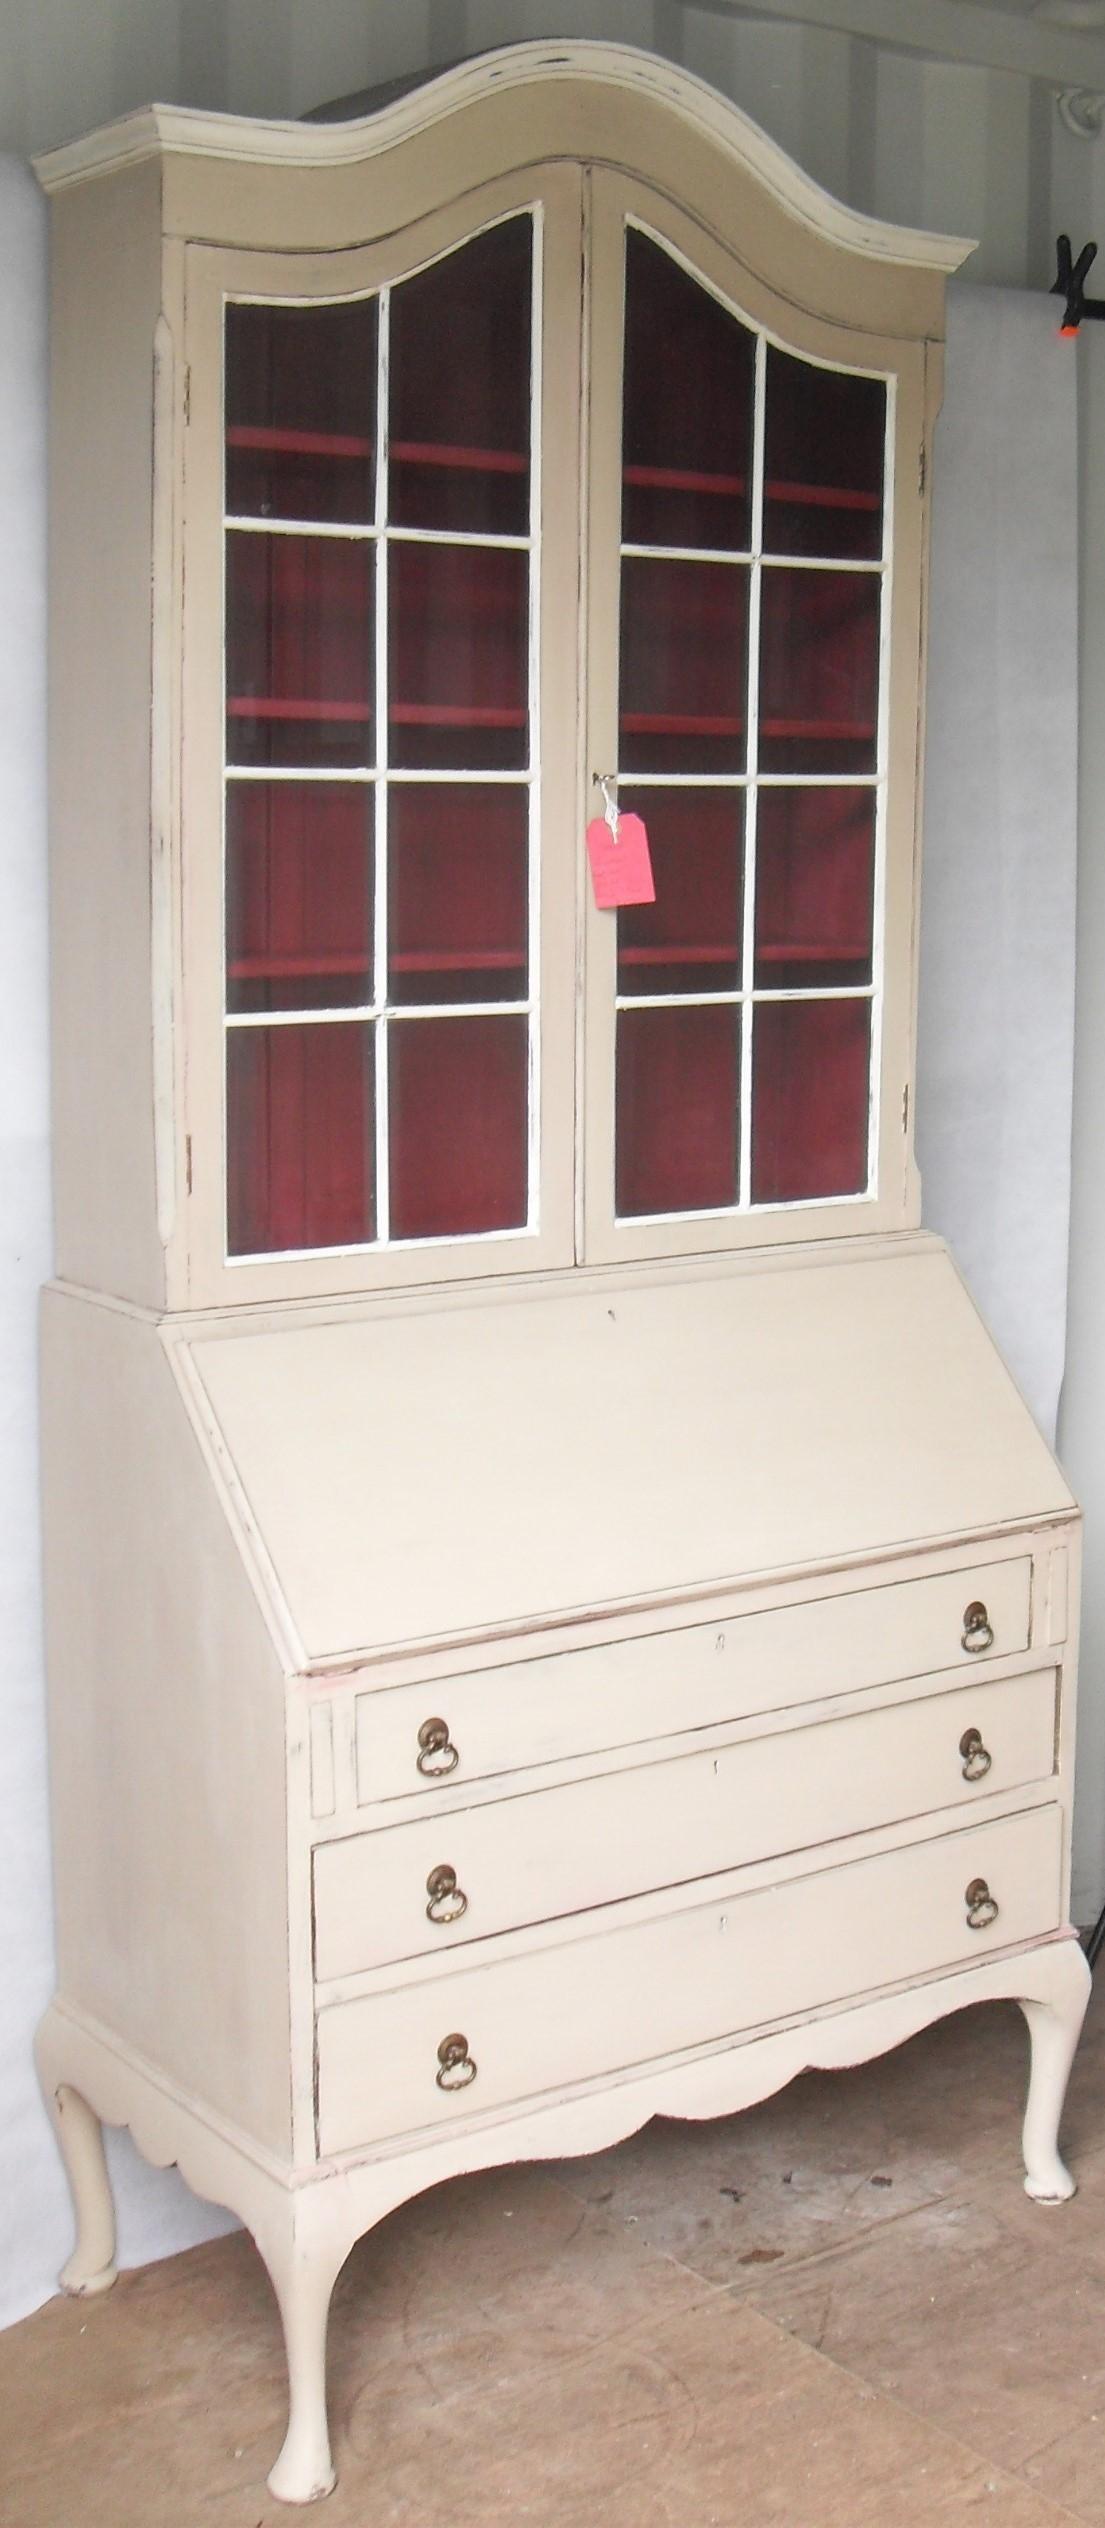 A dome-topped painted bureau bookcase in the Georgian style with twin glazed doors revealing a